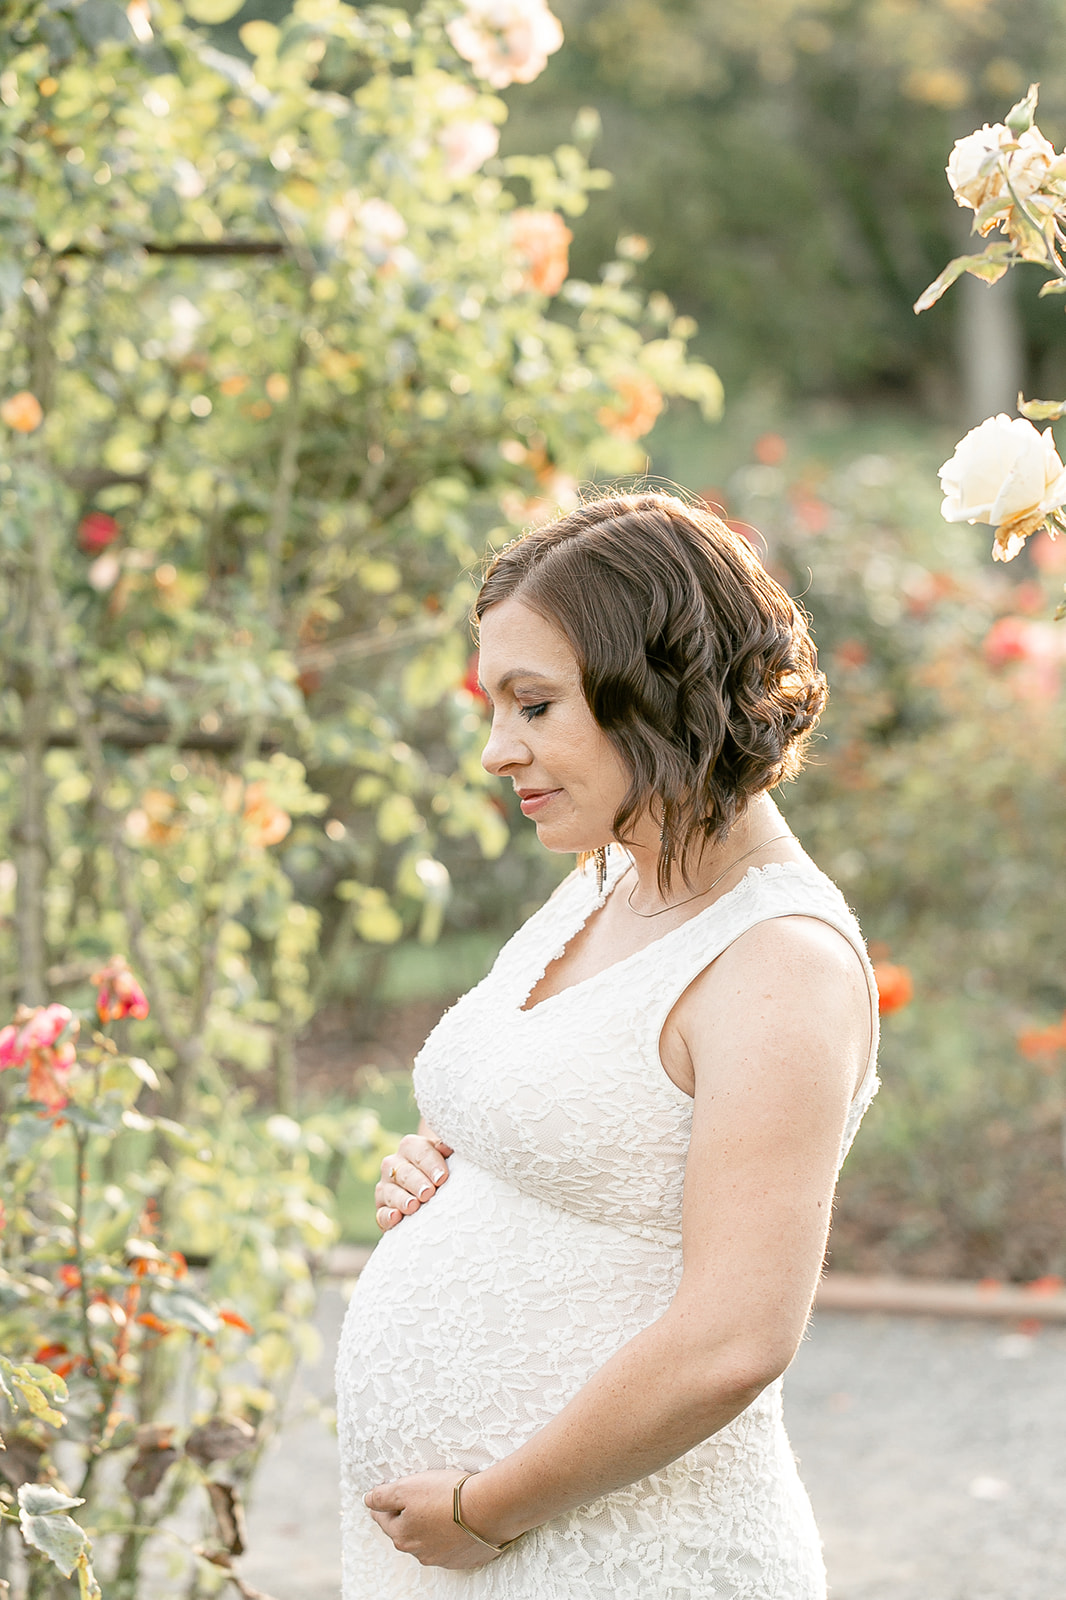 A pregnant woman in a white lace dress stands in a rose garden holding her bump